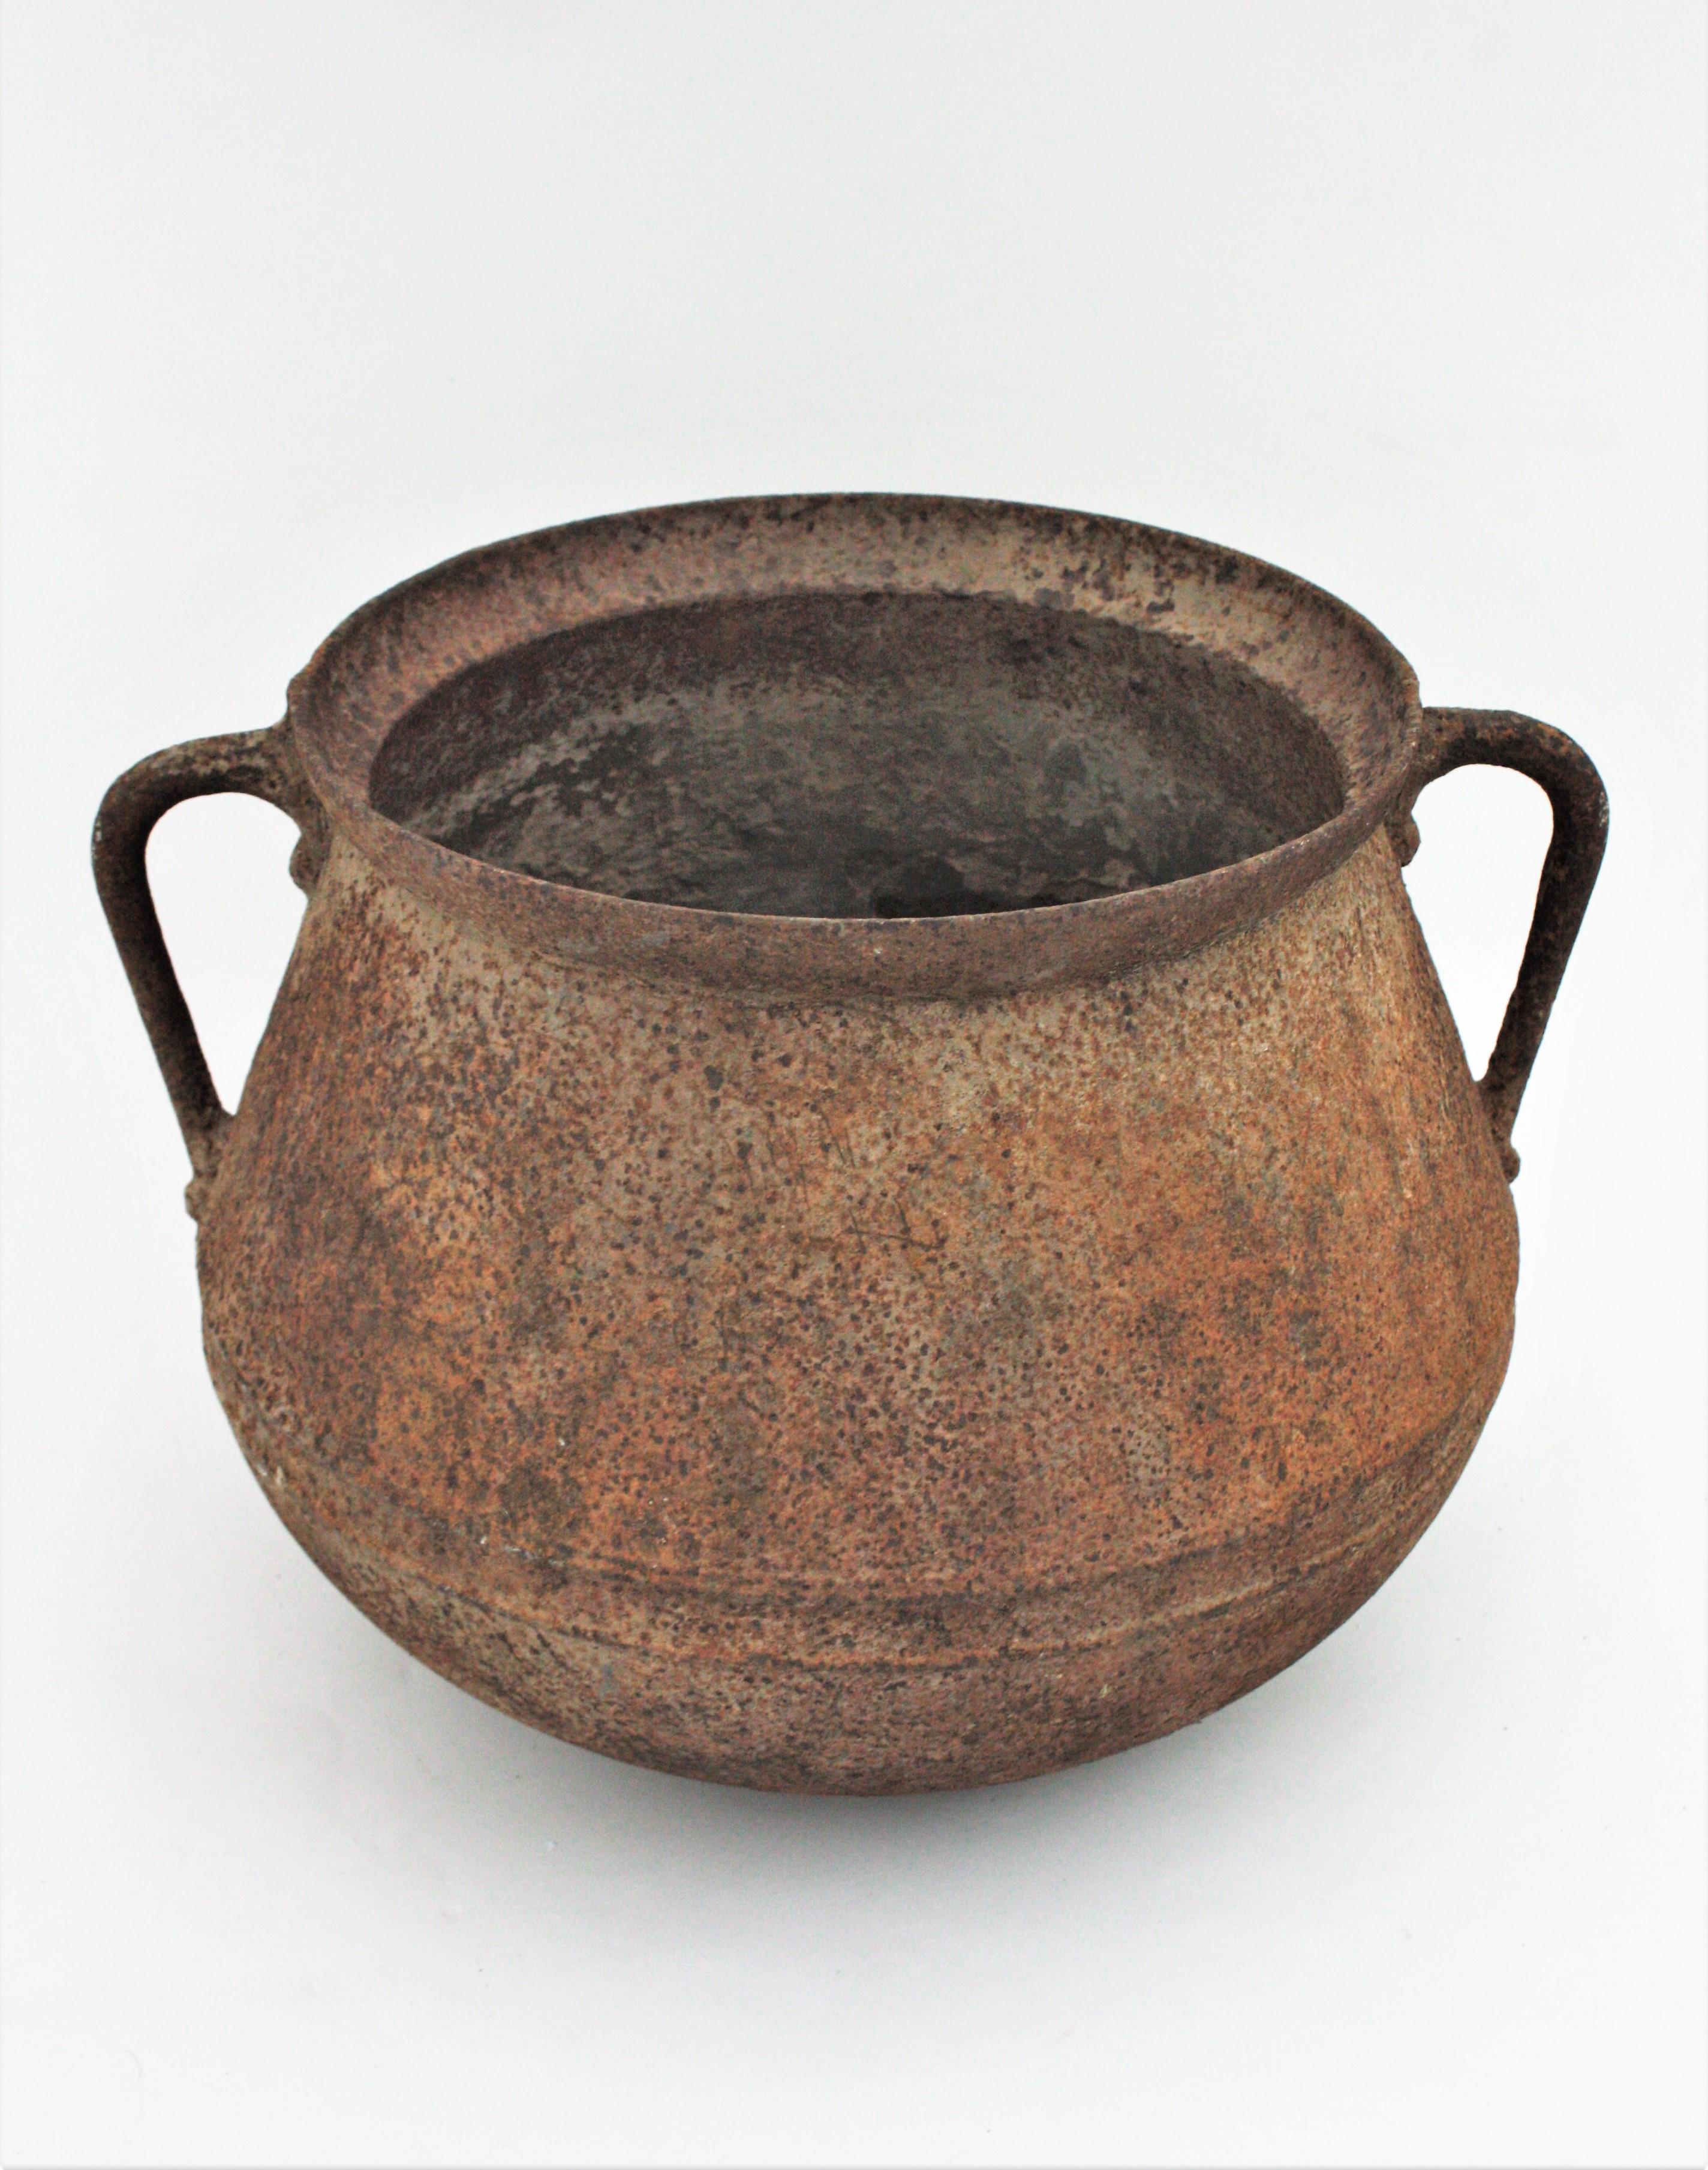 Spanish Rustic Iron Cauldron Pot or Vessel with Rusty Original Patina For Sale 3